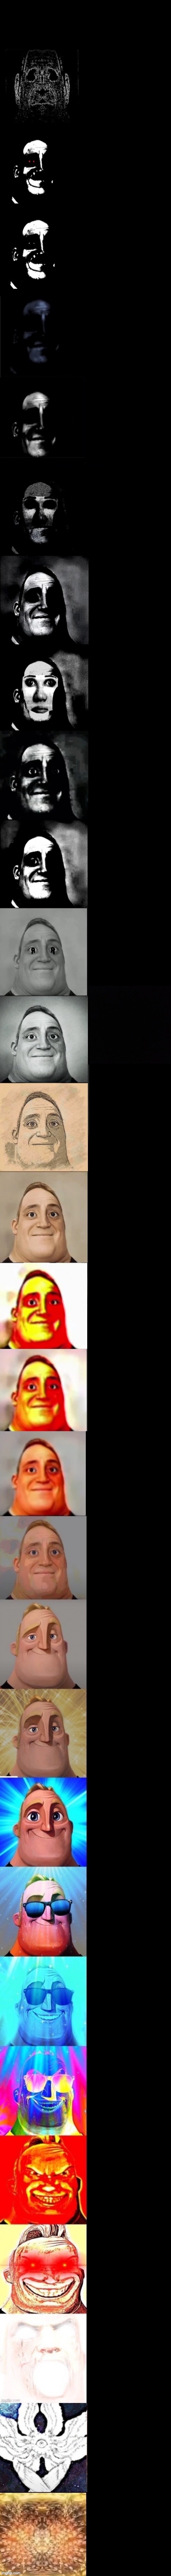 High Quality Mr Incredible Becoming Uncanny To Canny But It's Decent Blank Meme Template